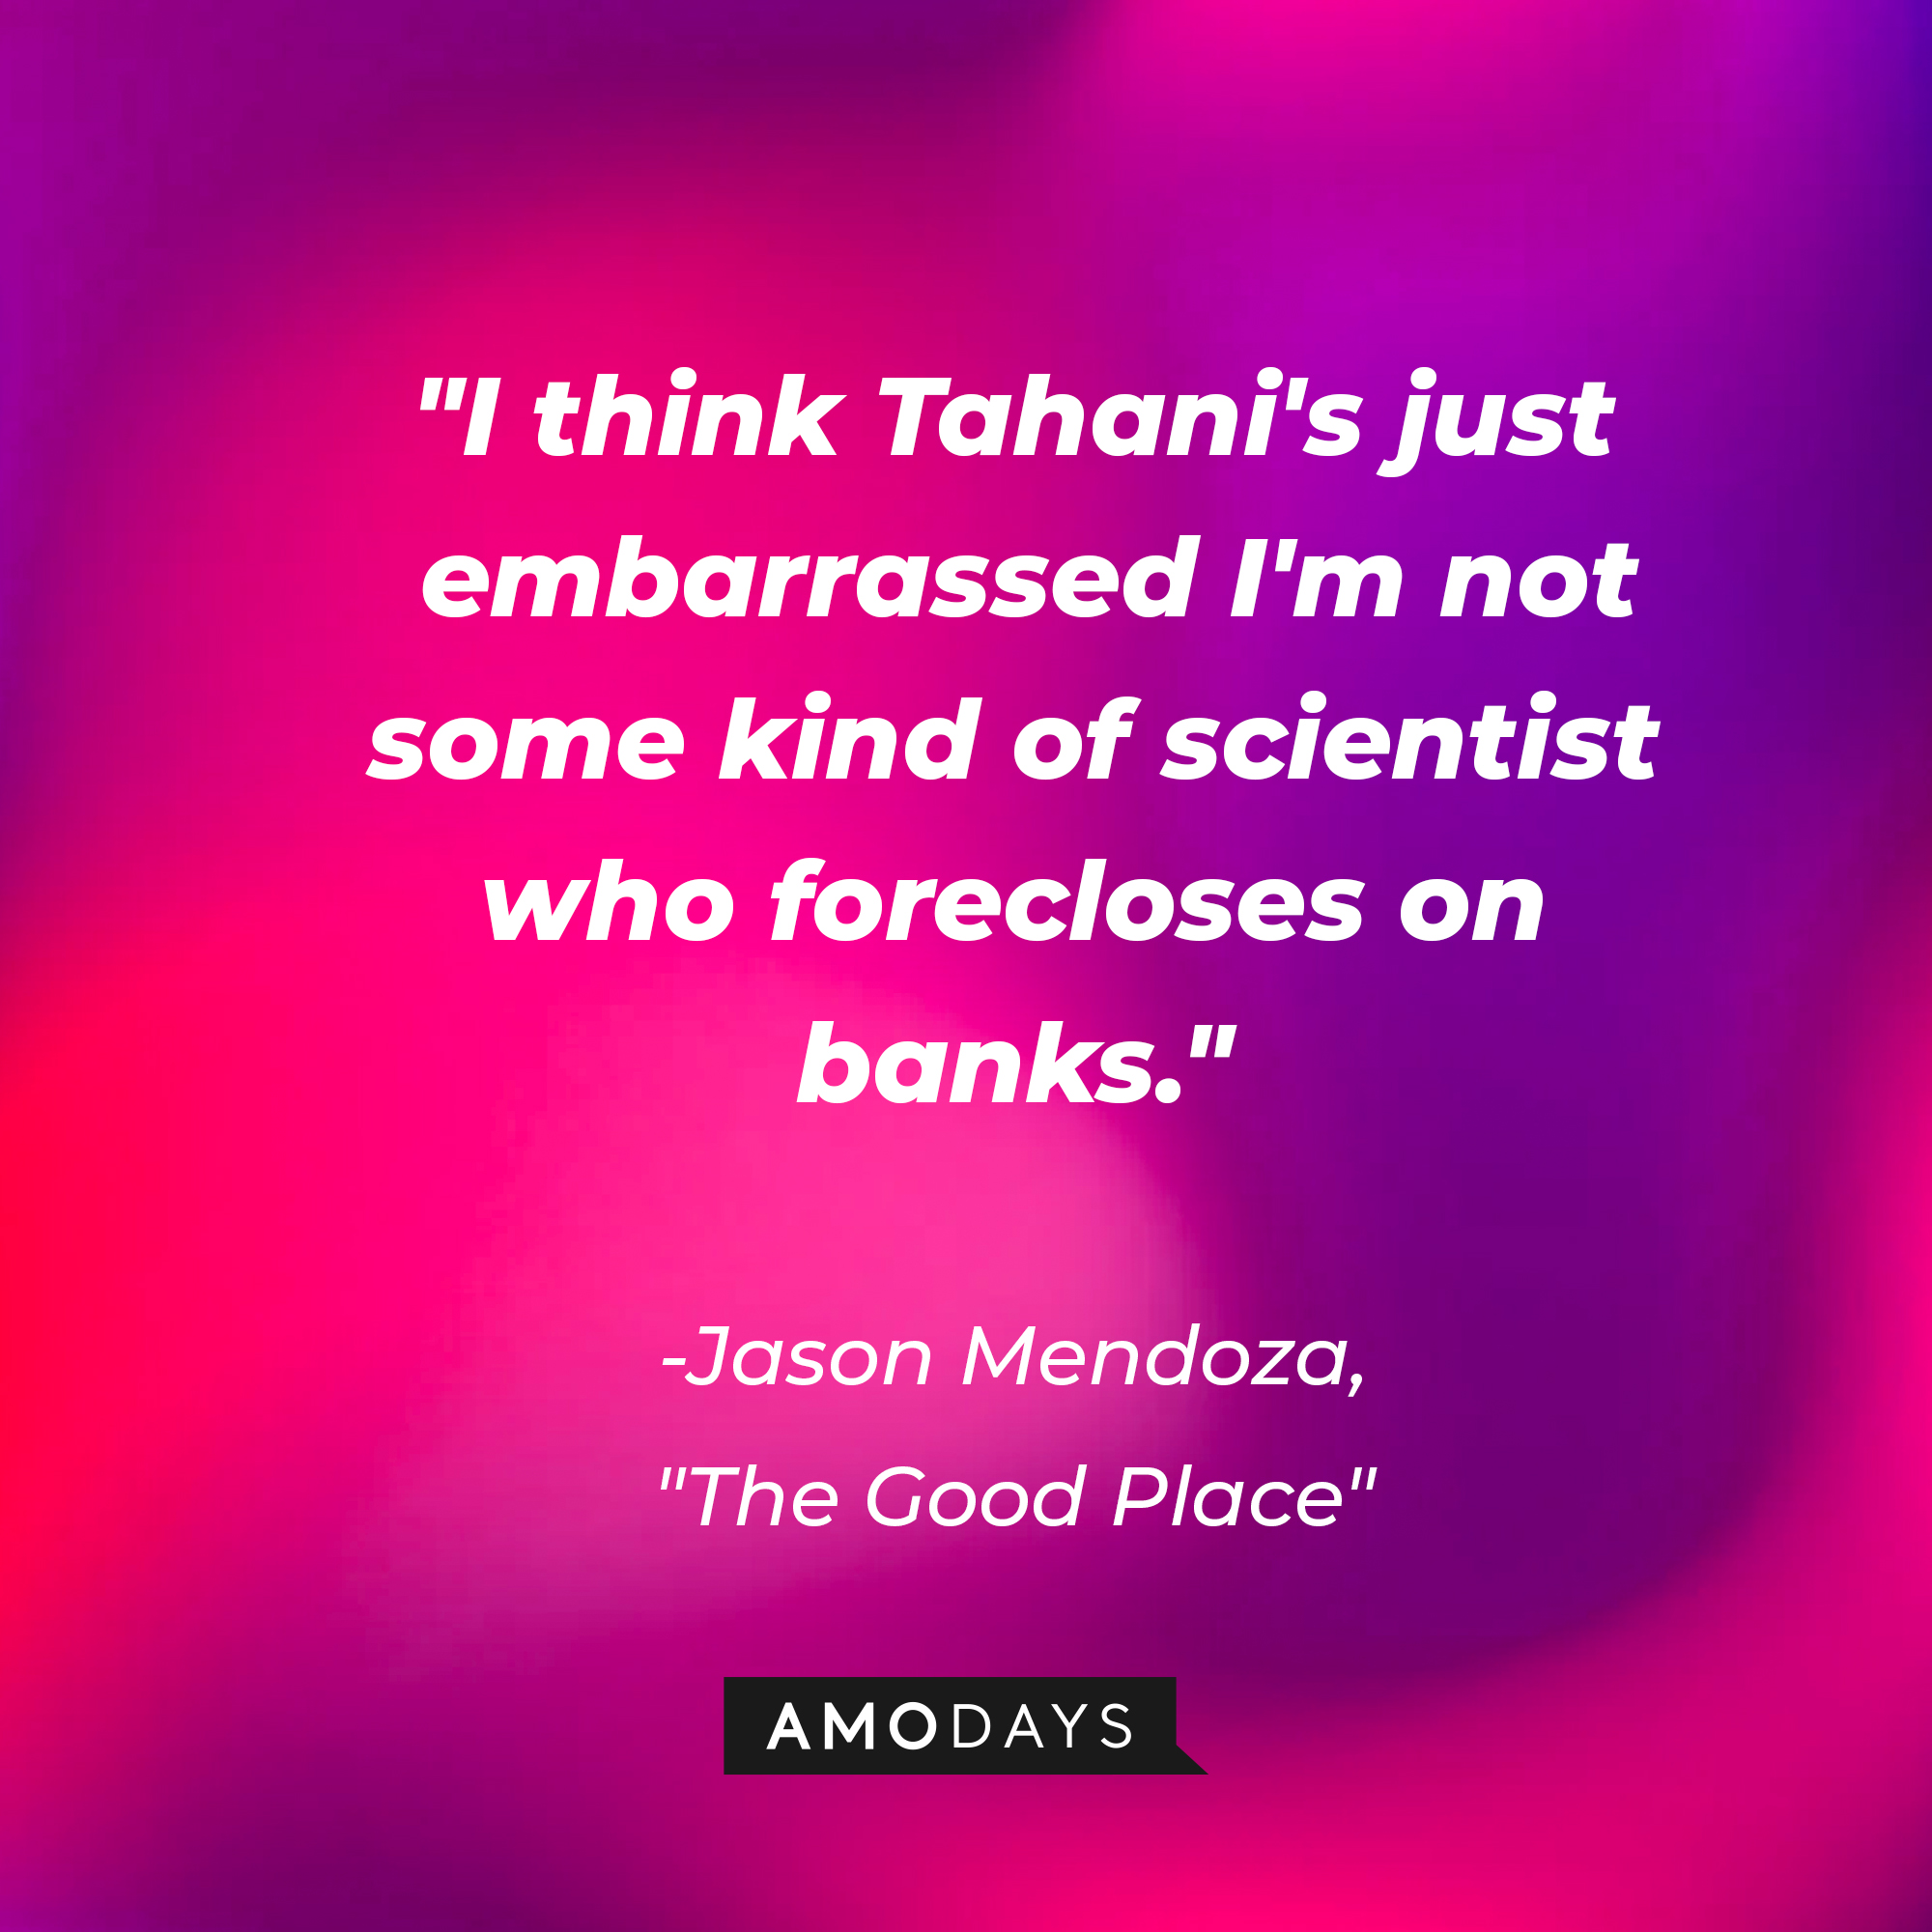 Jason Mendoza's quote in "The Good Place:" “"I think Tahani's just embarrassed I'm not some kind of scientist who forecloses on banks.” | Source: Amodays